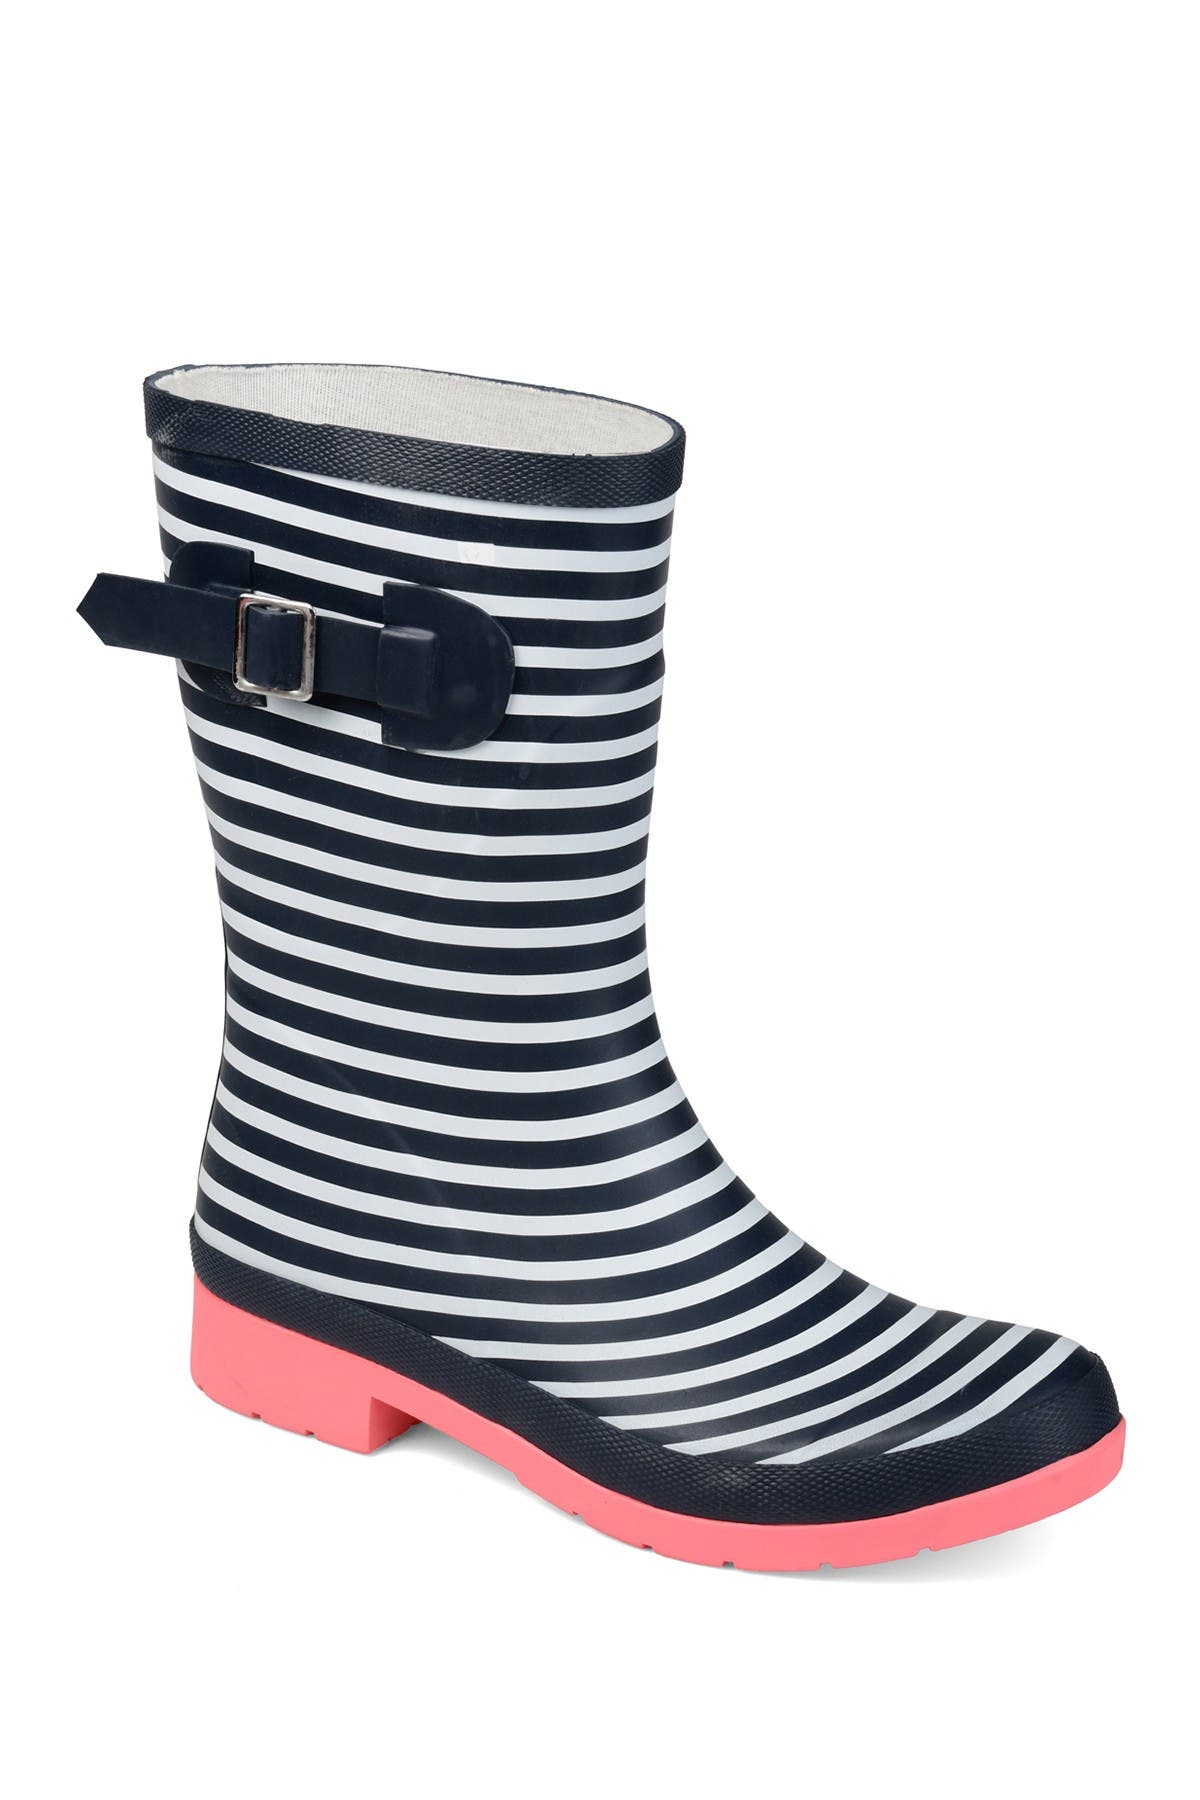 Journee Collection Seattle Rain Boot In Open Miscellaneous2